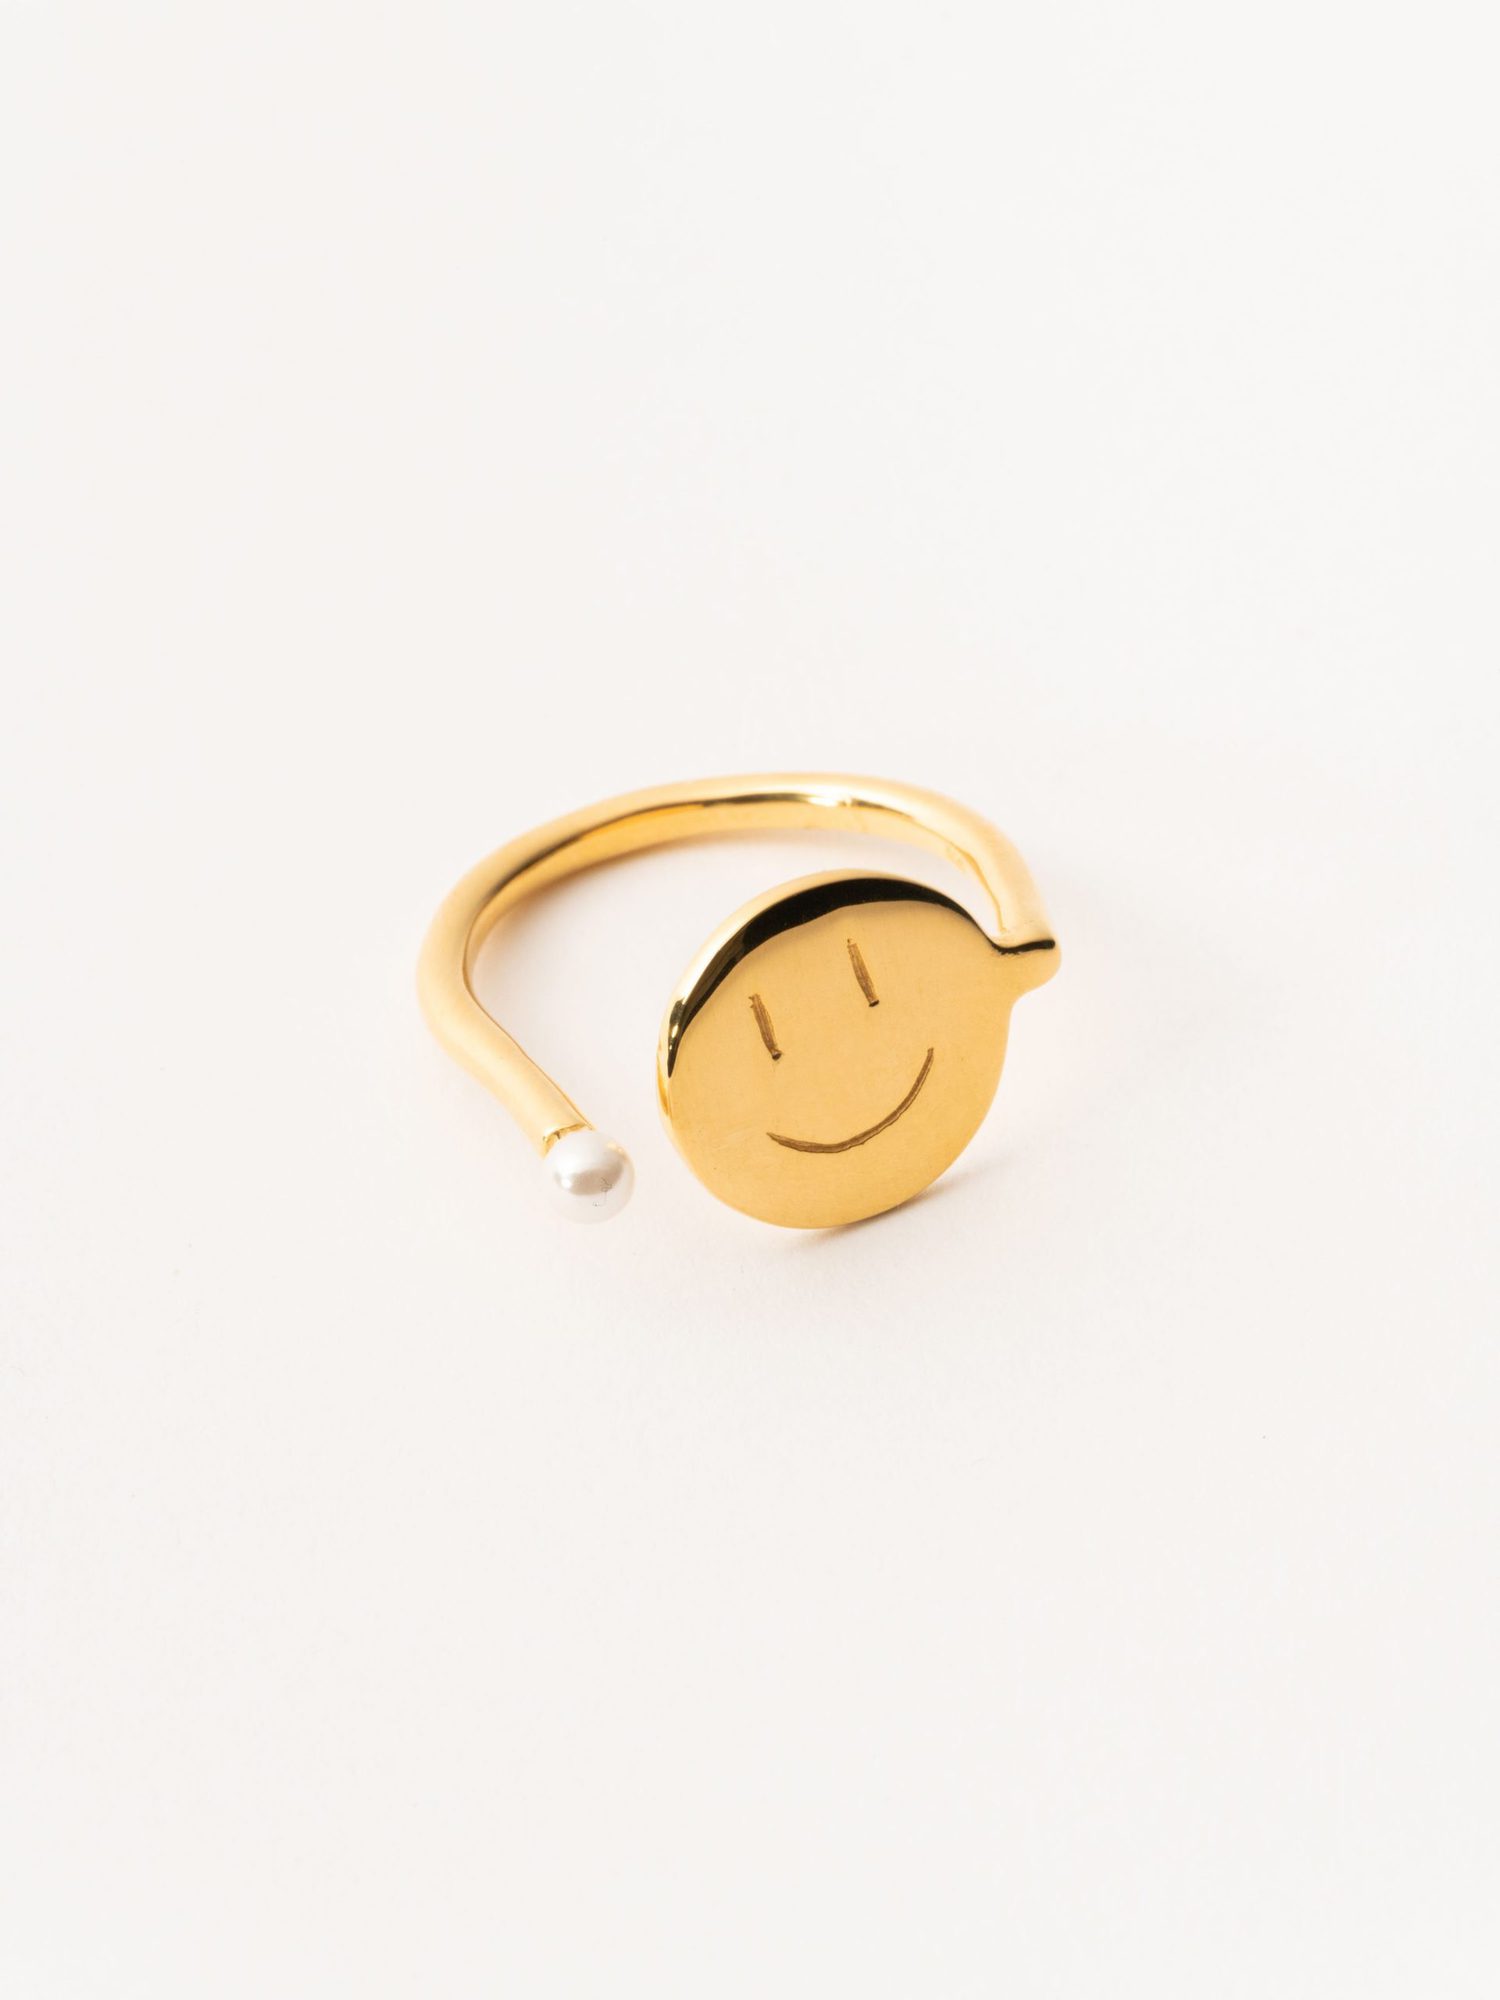 Gold Smiley Face Open Charm Ring